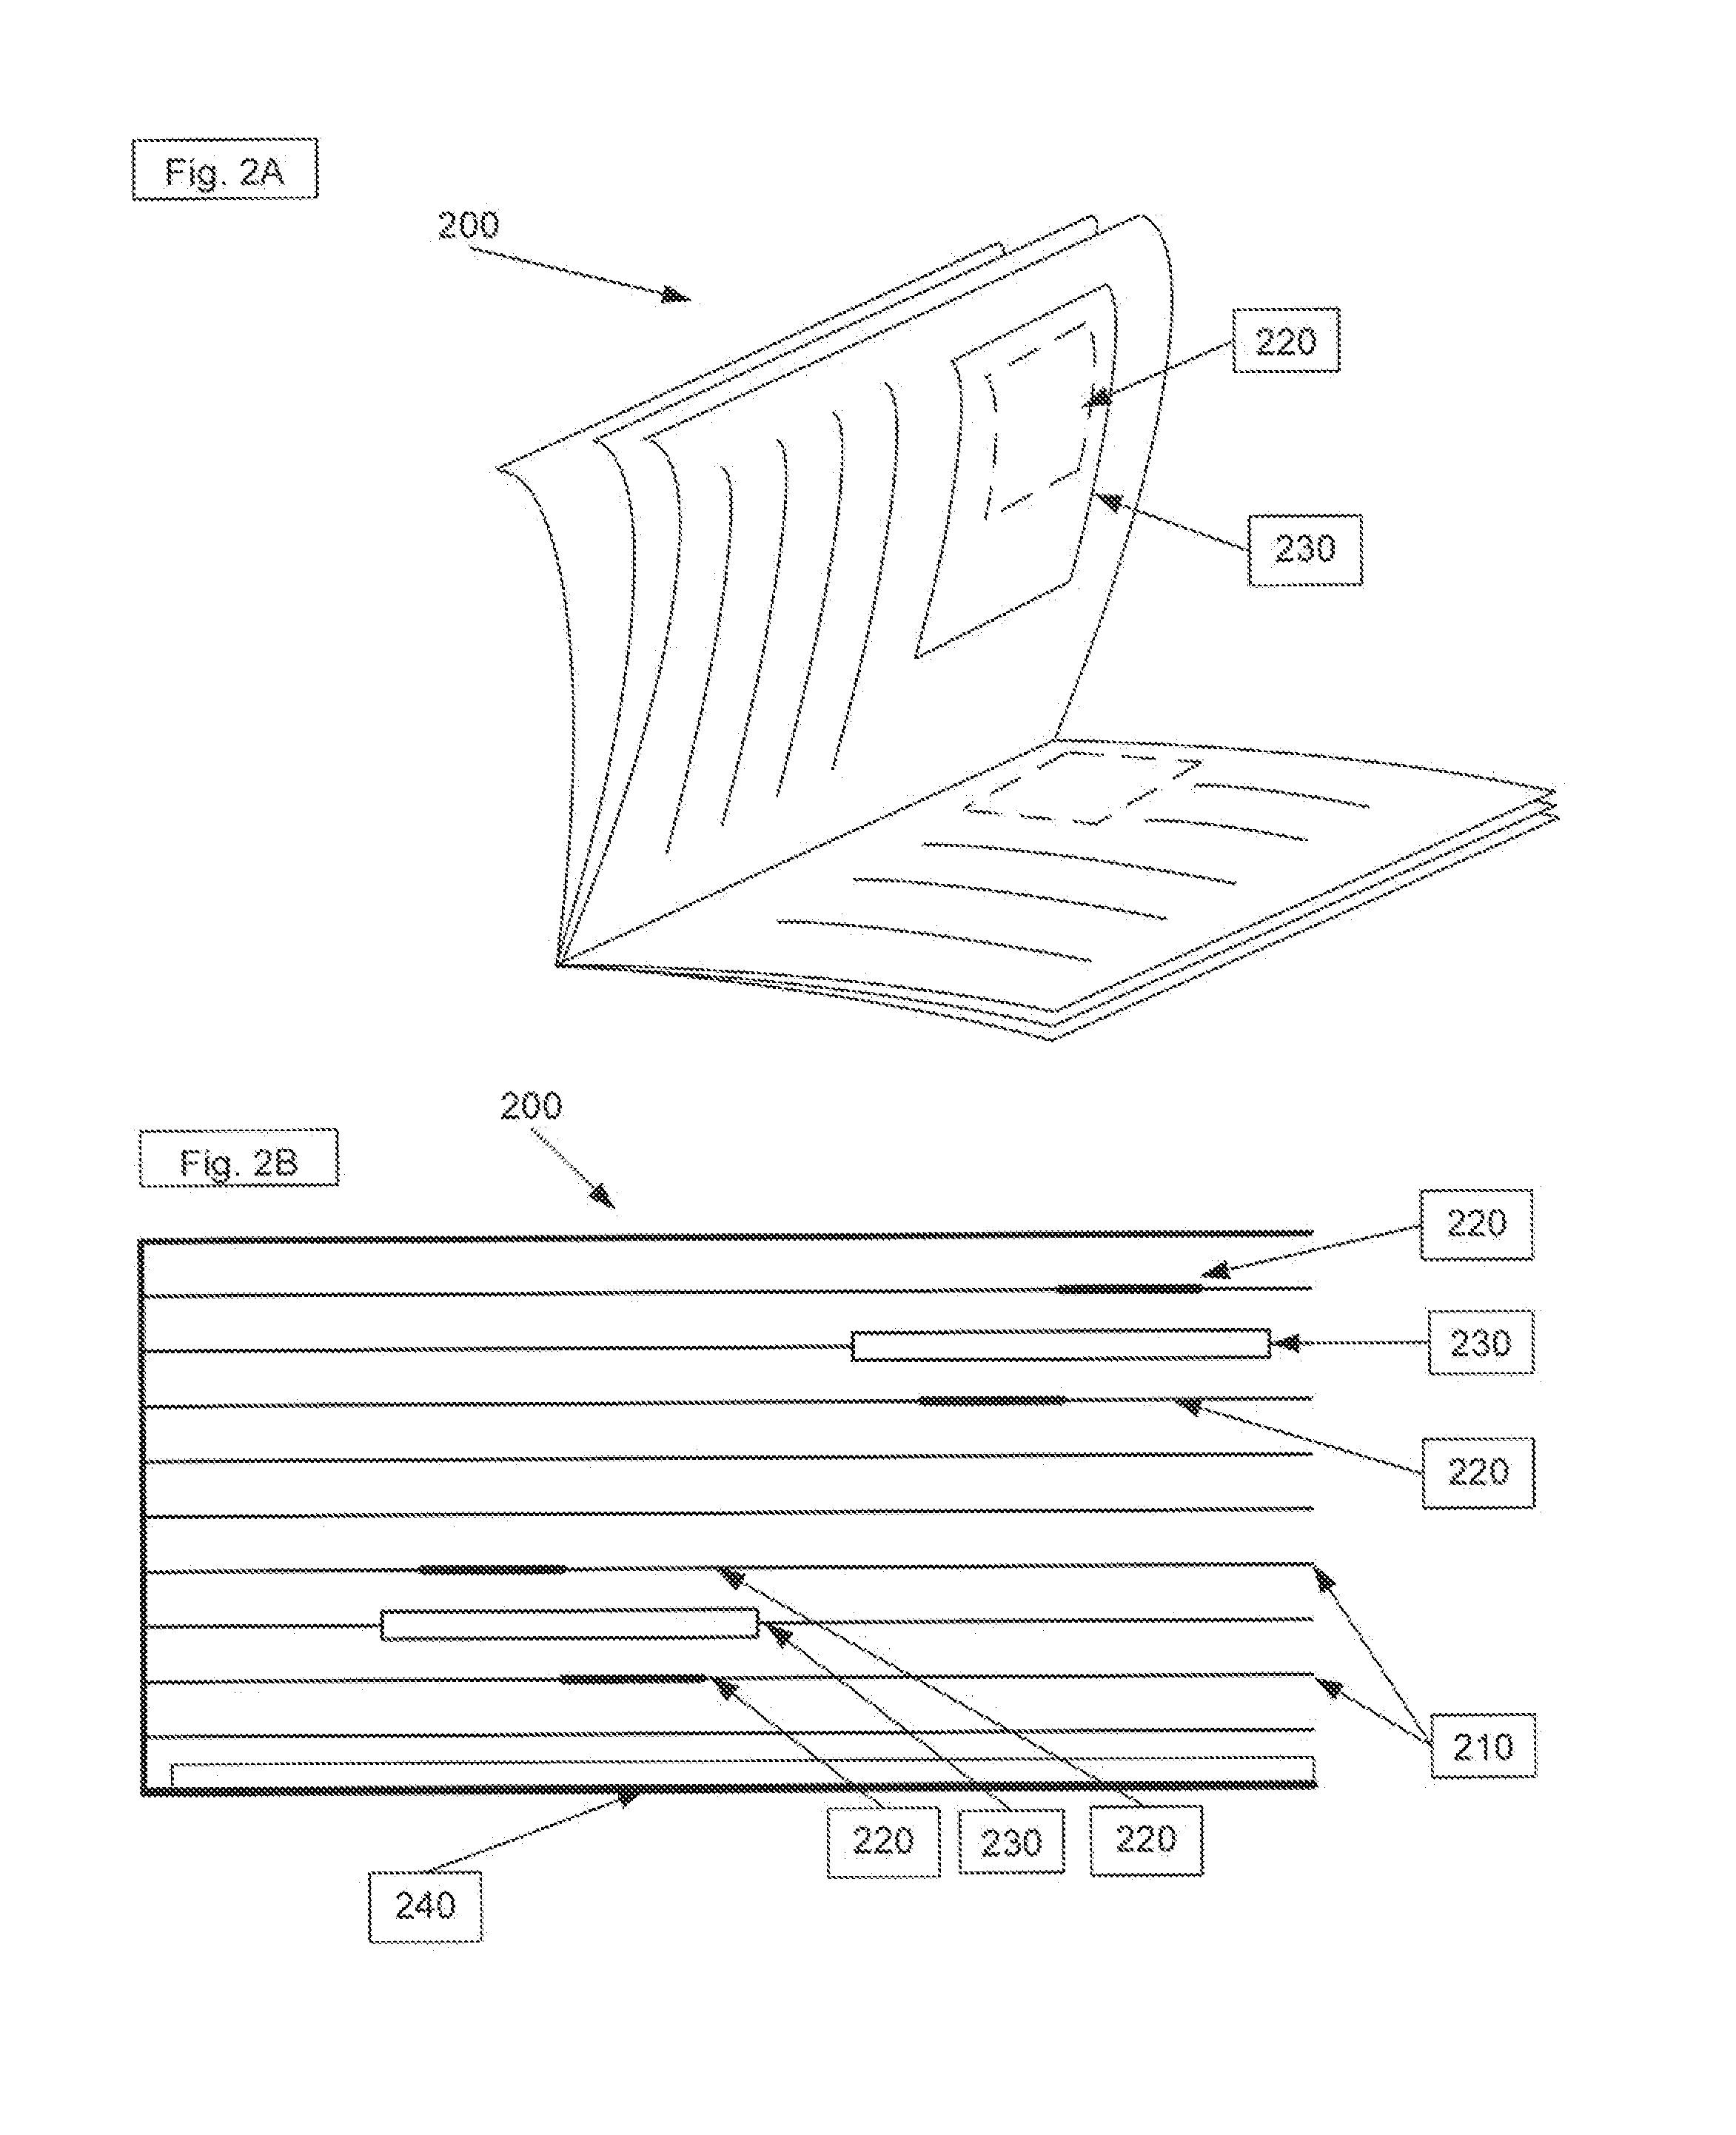 System and method for rfid-based printed media reading activity data acquisition and analysis